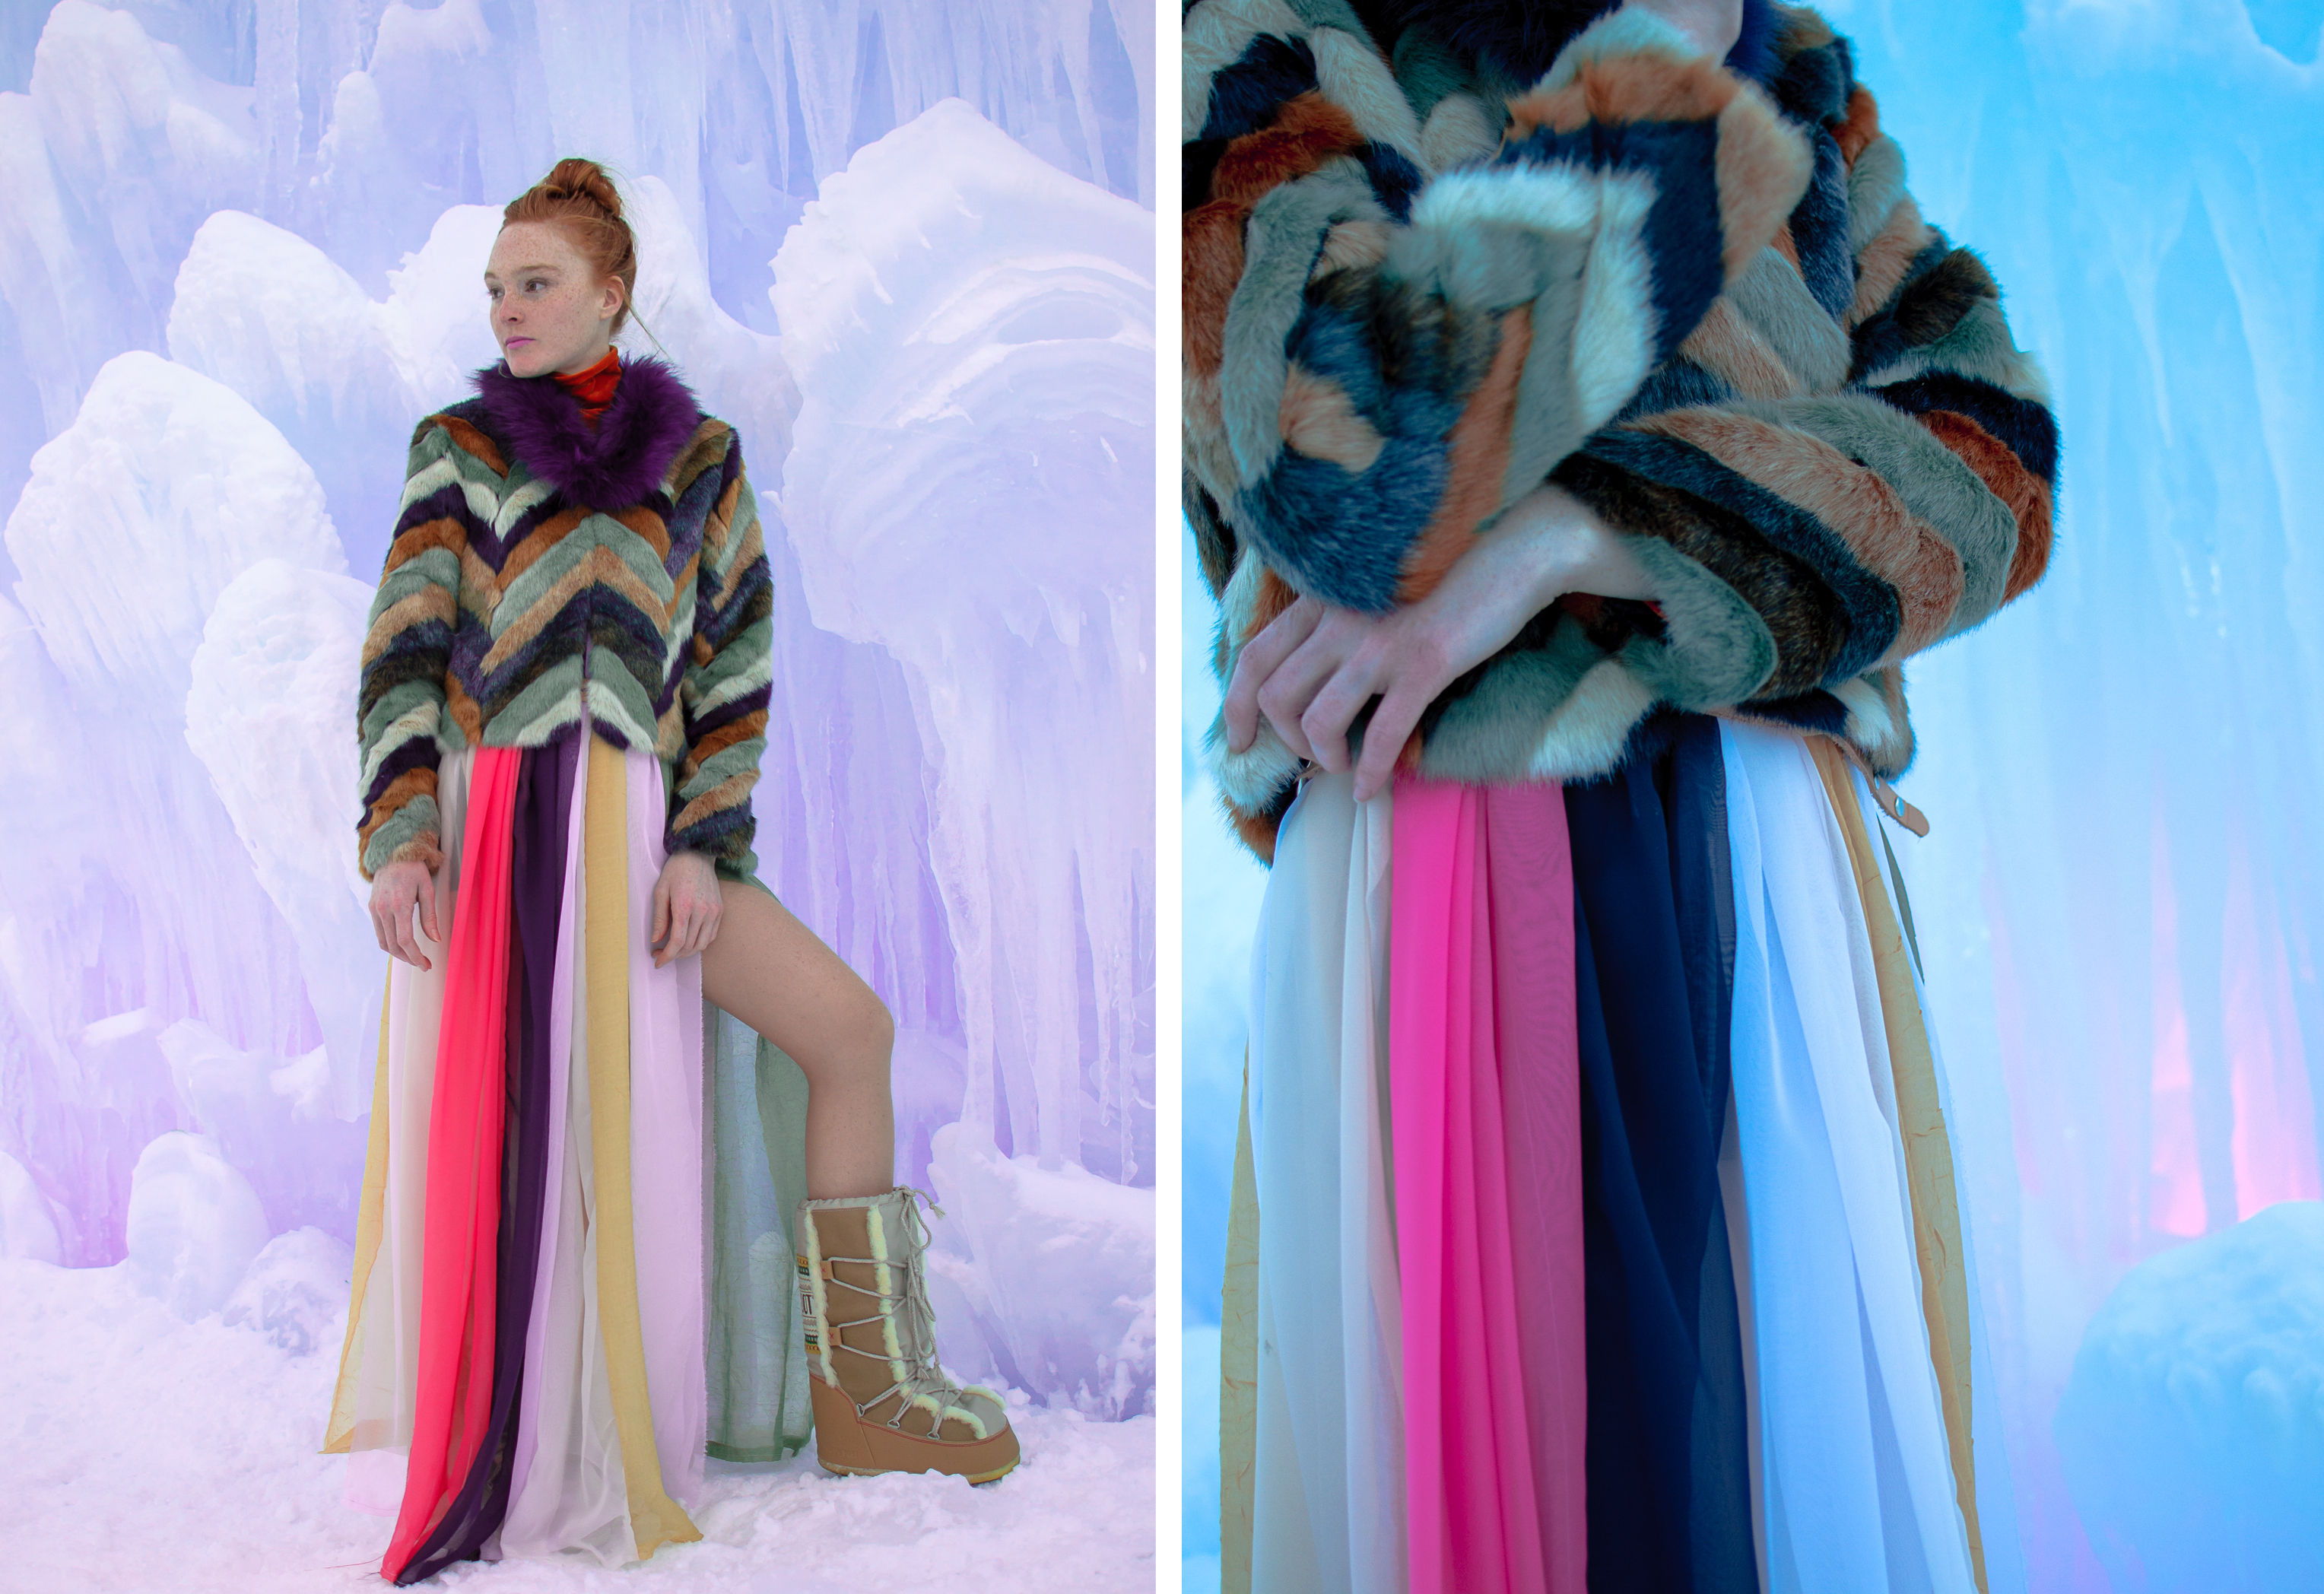 faux fur coat and chloe inspired dress at the ice castles